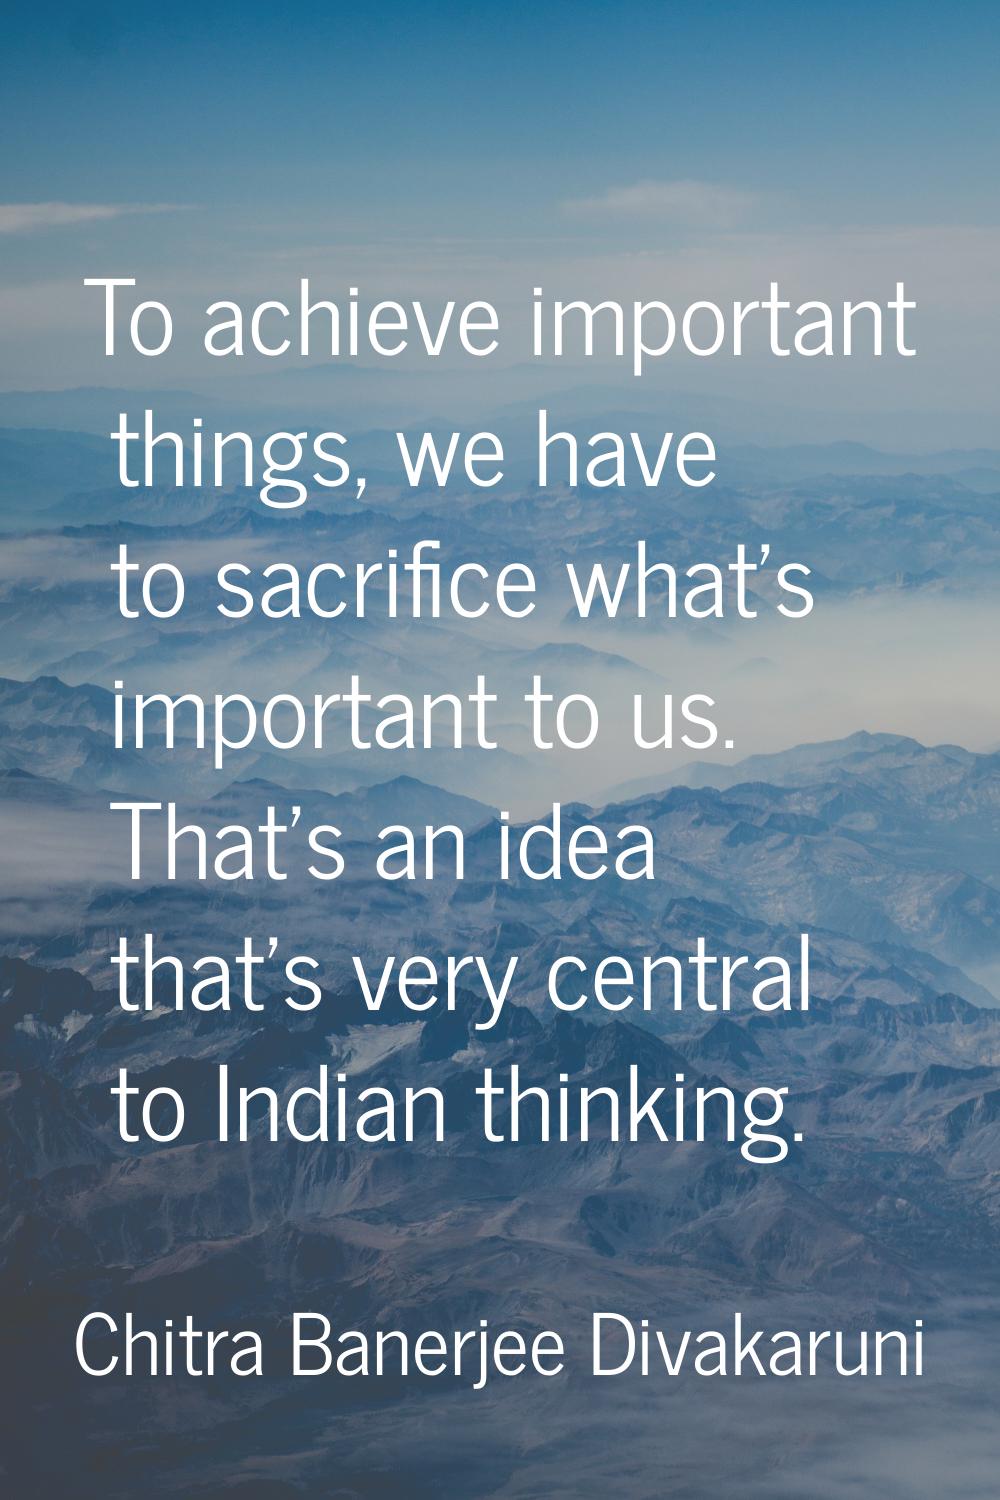 To achieve important things, we have to sacrifice what's important to us. That's an idea that's ver